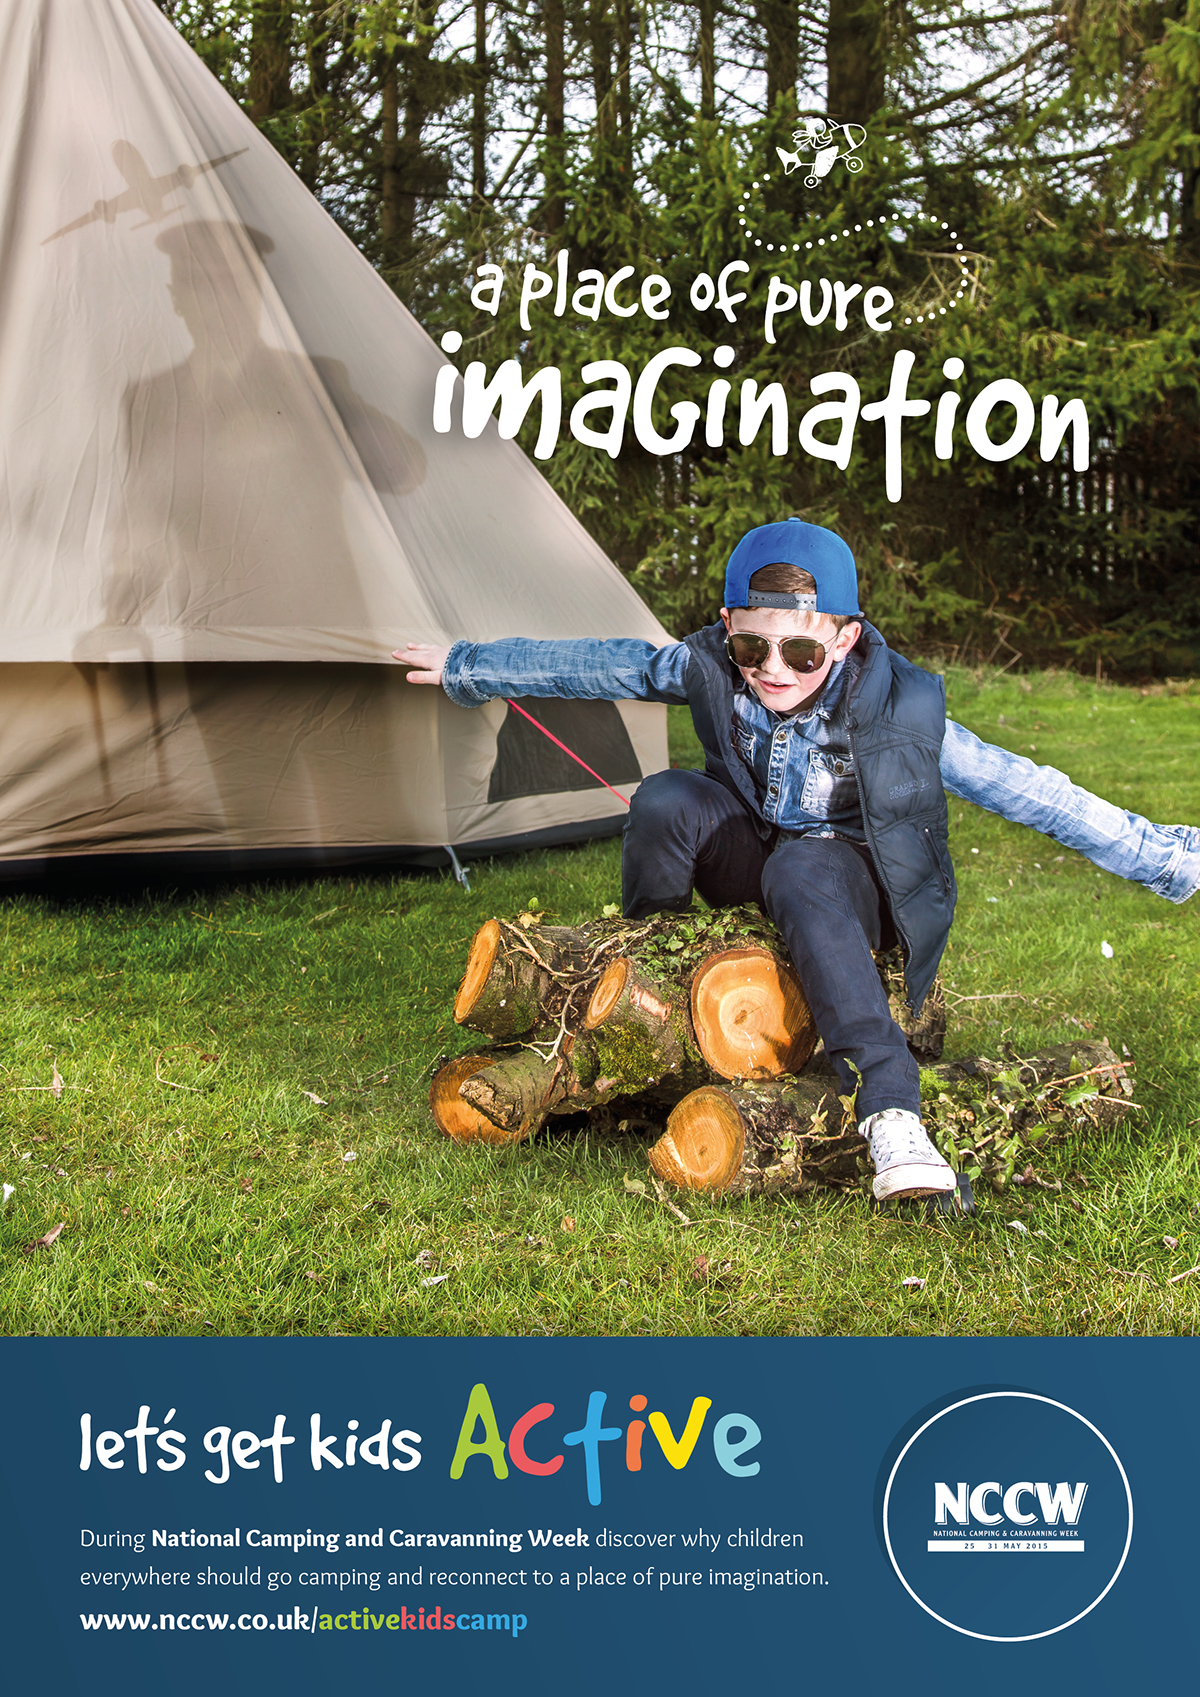 national campaign camping outdoors children kids Health care imagination pure